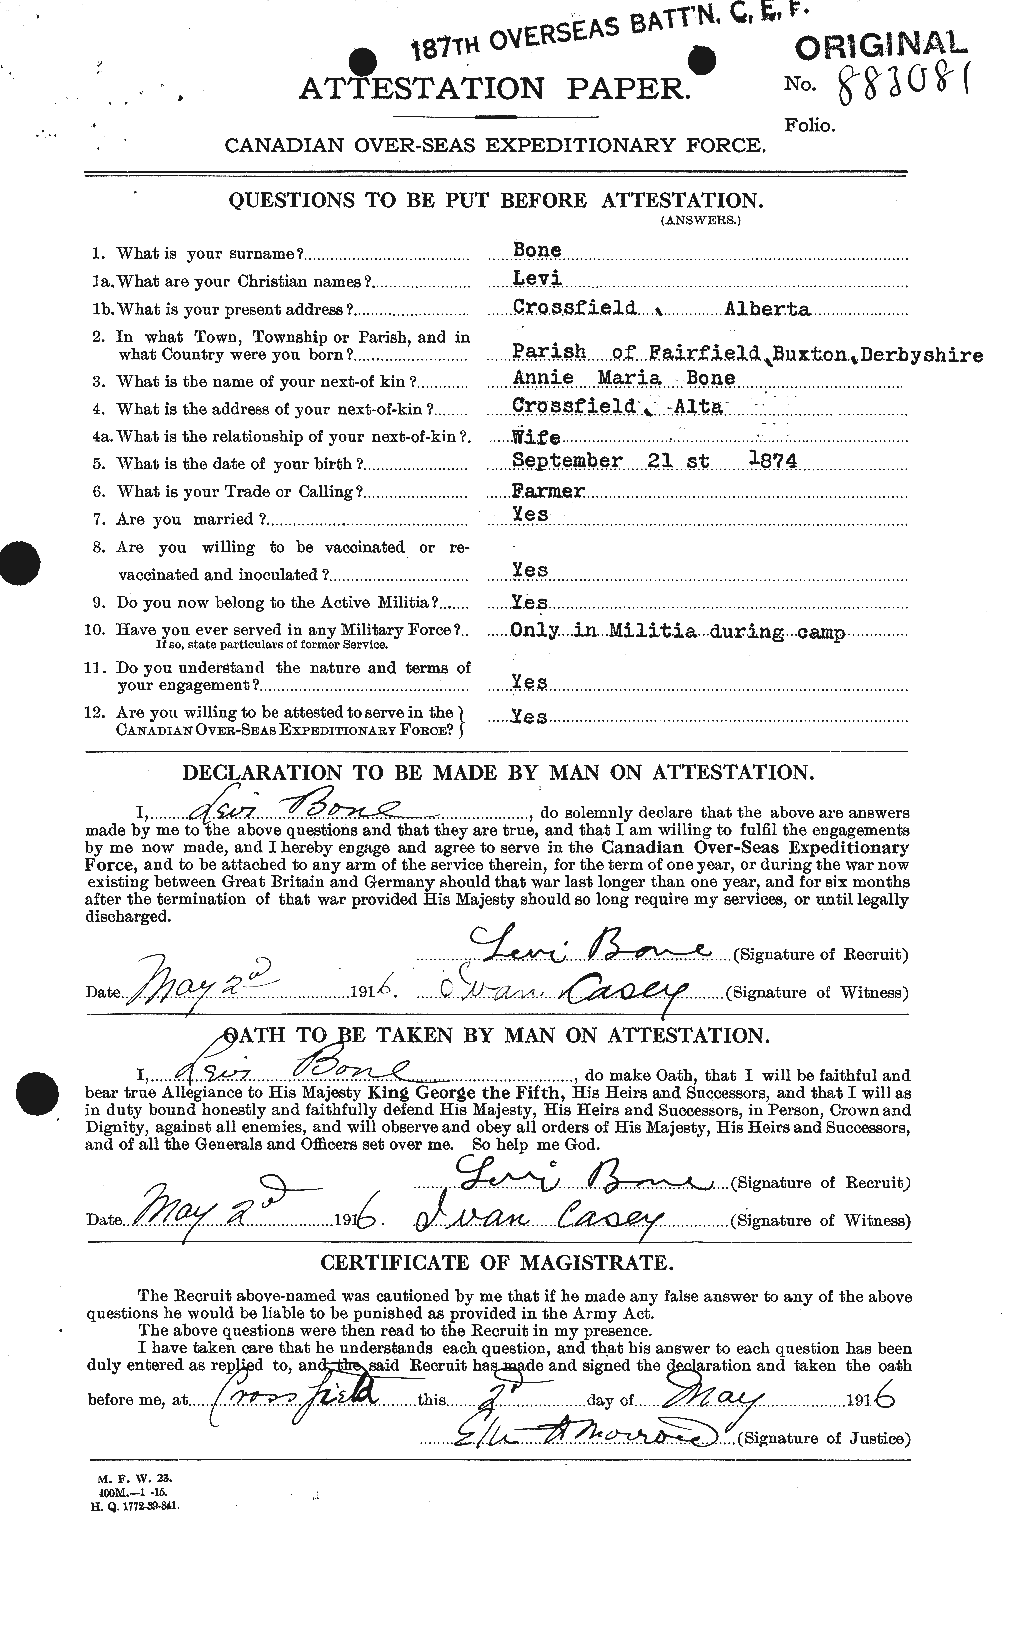 Personnel Records of the First World War - CEF 250532a